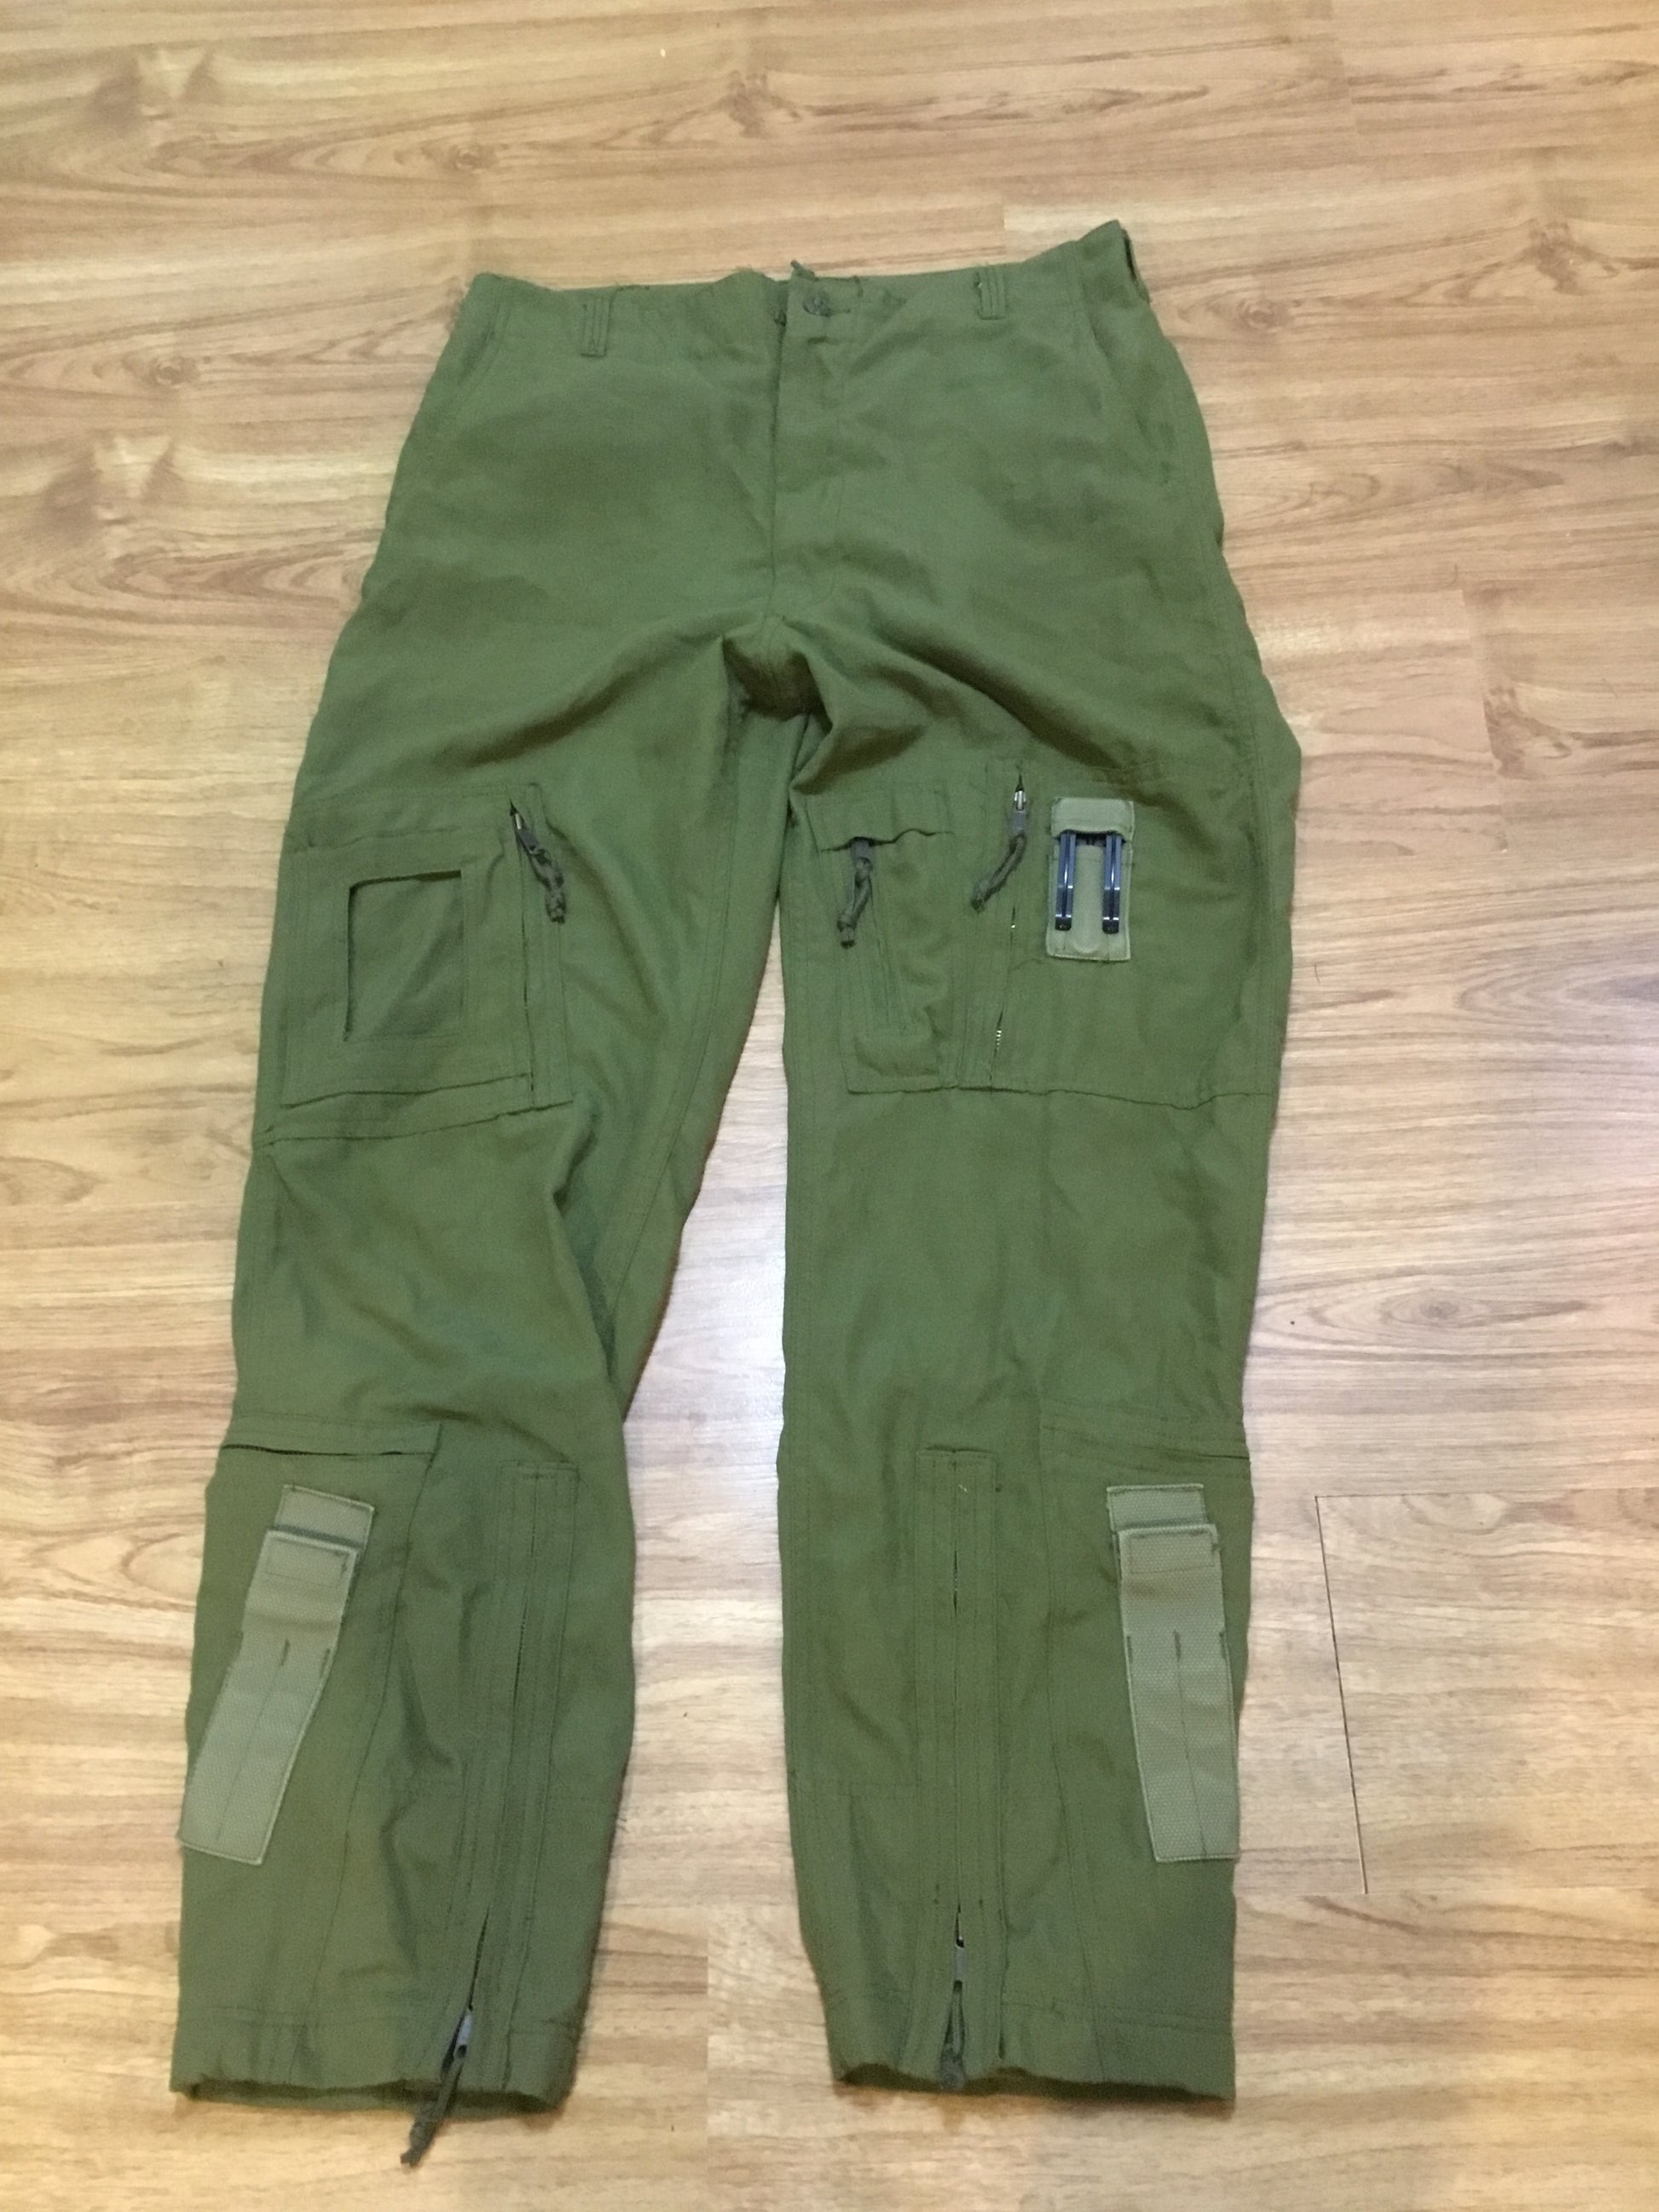 Canadian military wind pants